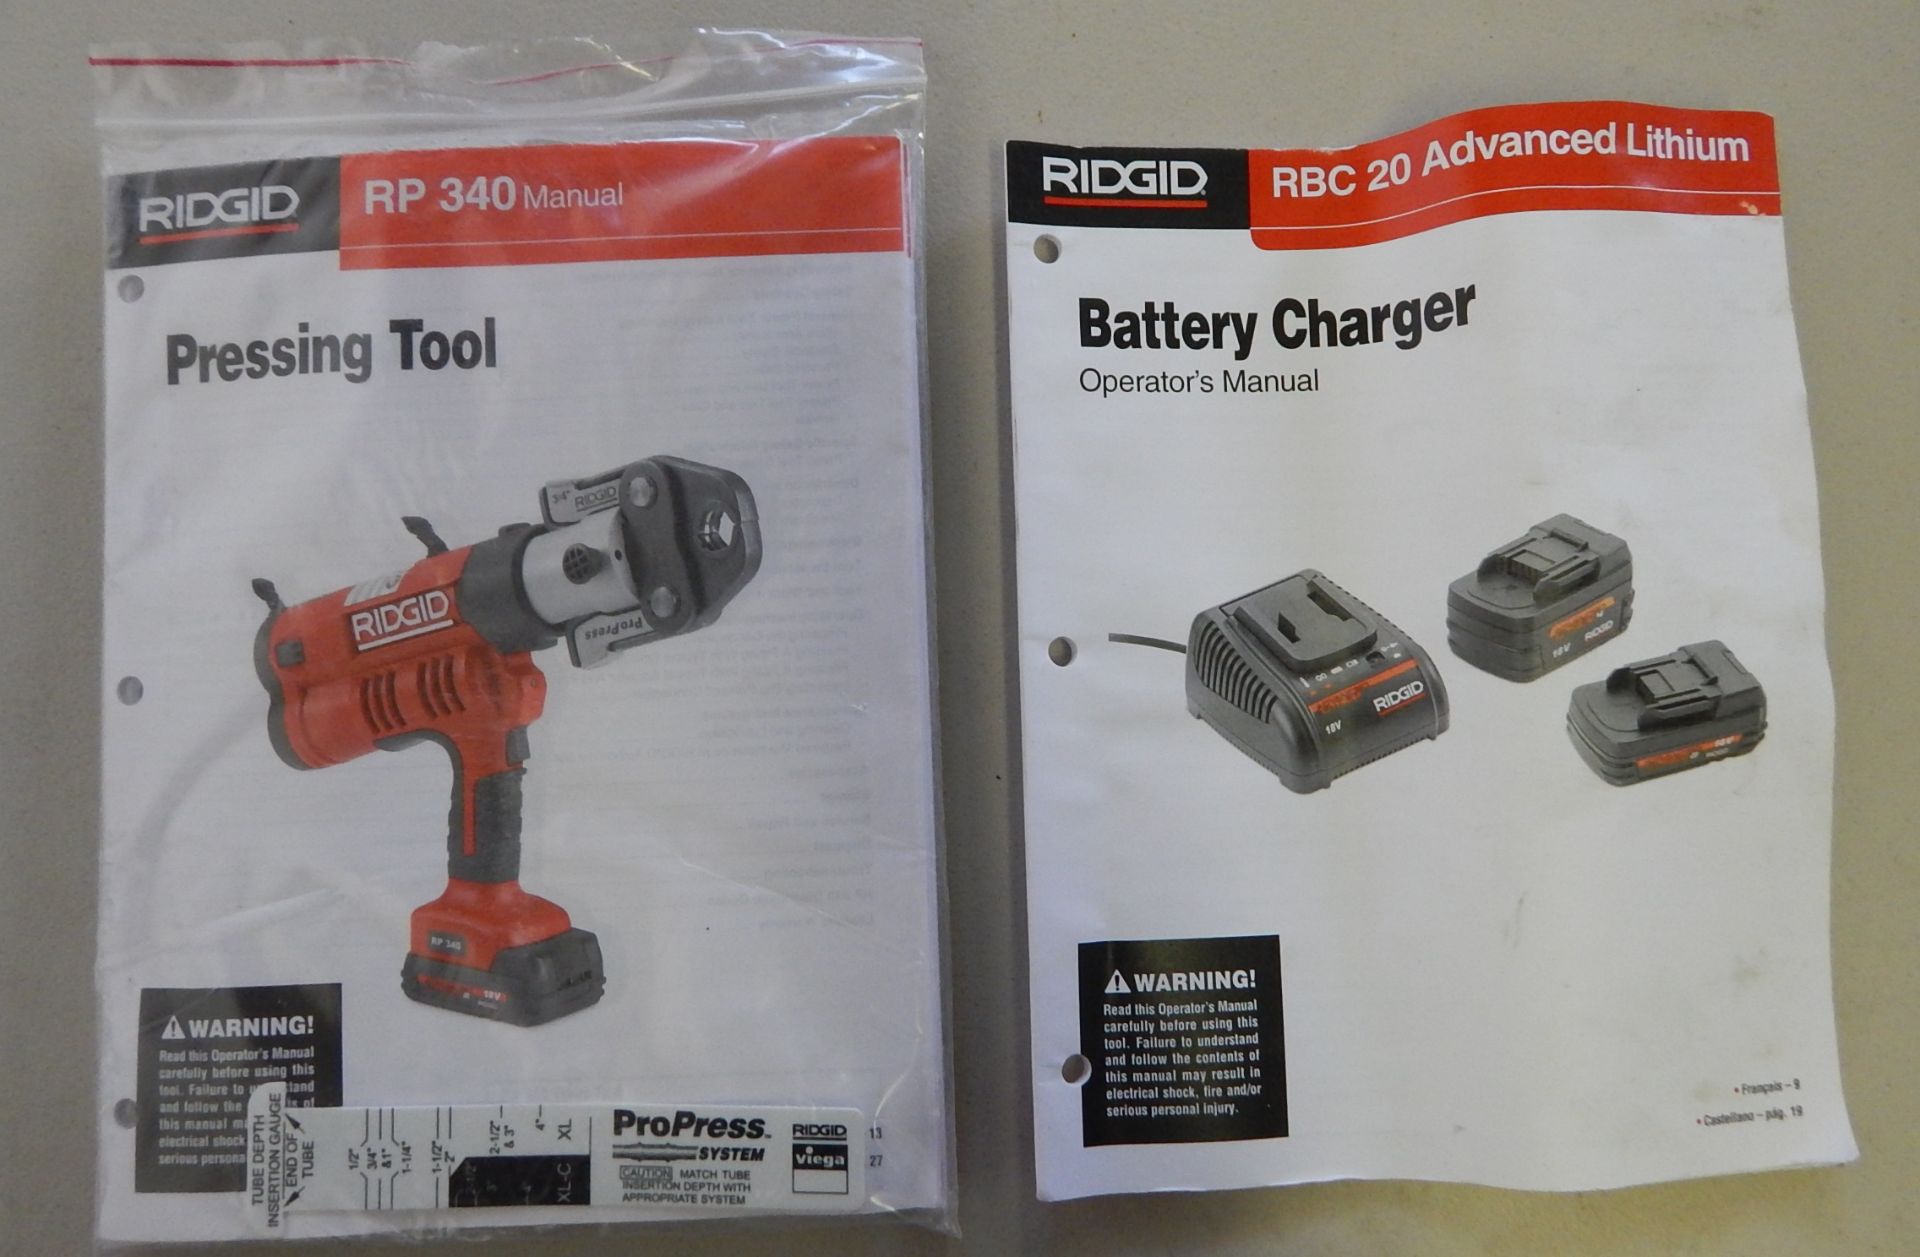 Ridgid Model RP340 Pressing Tool, includes 1/2 - 2" Dies, 18V Cordless with Charger - Image 2 of 3